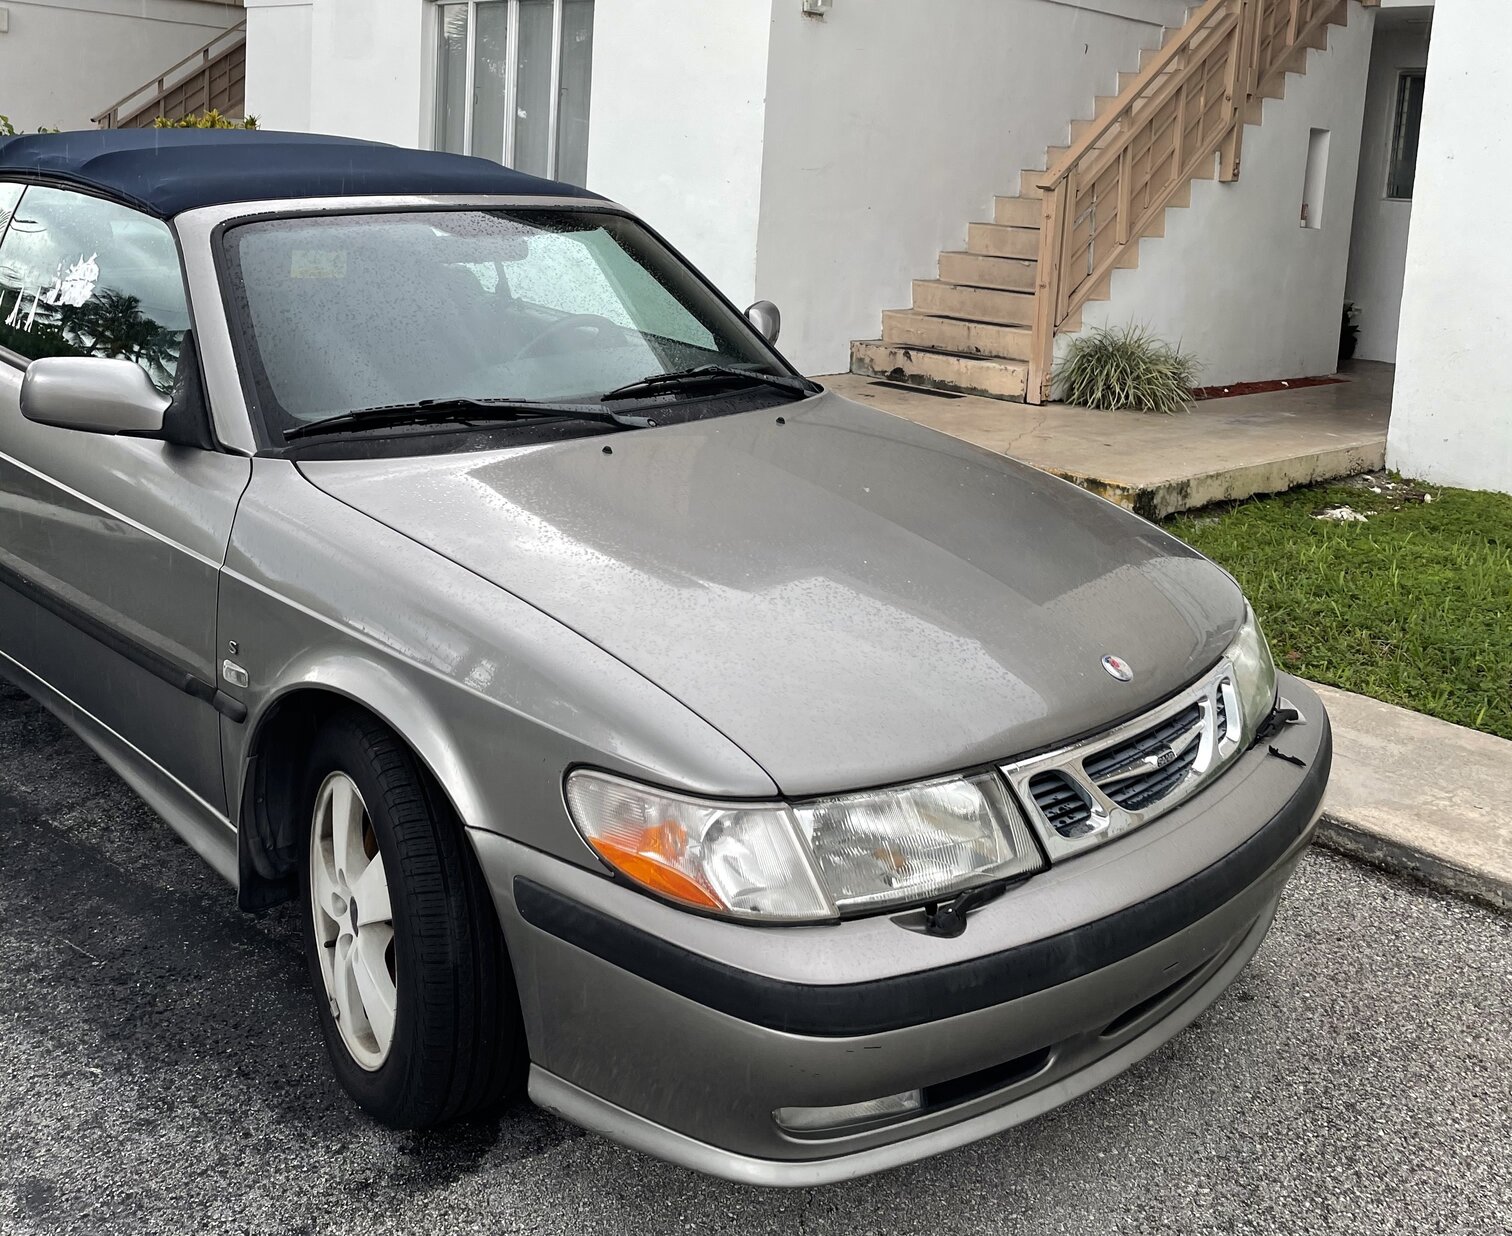 Cash for Junk Cars in Miami-Dade County